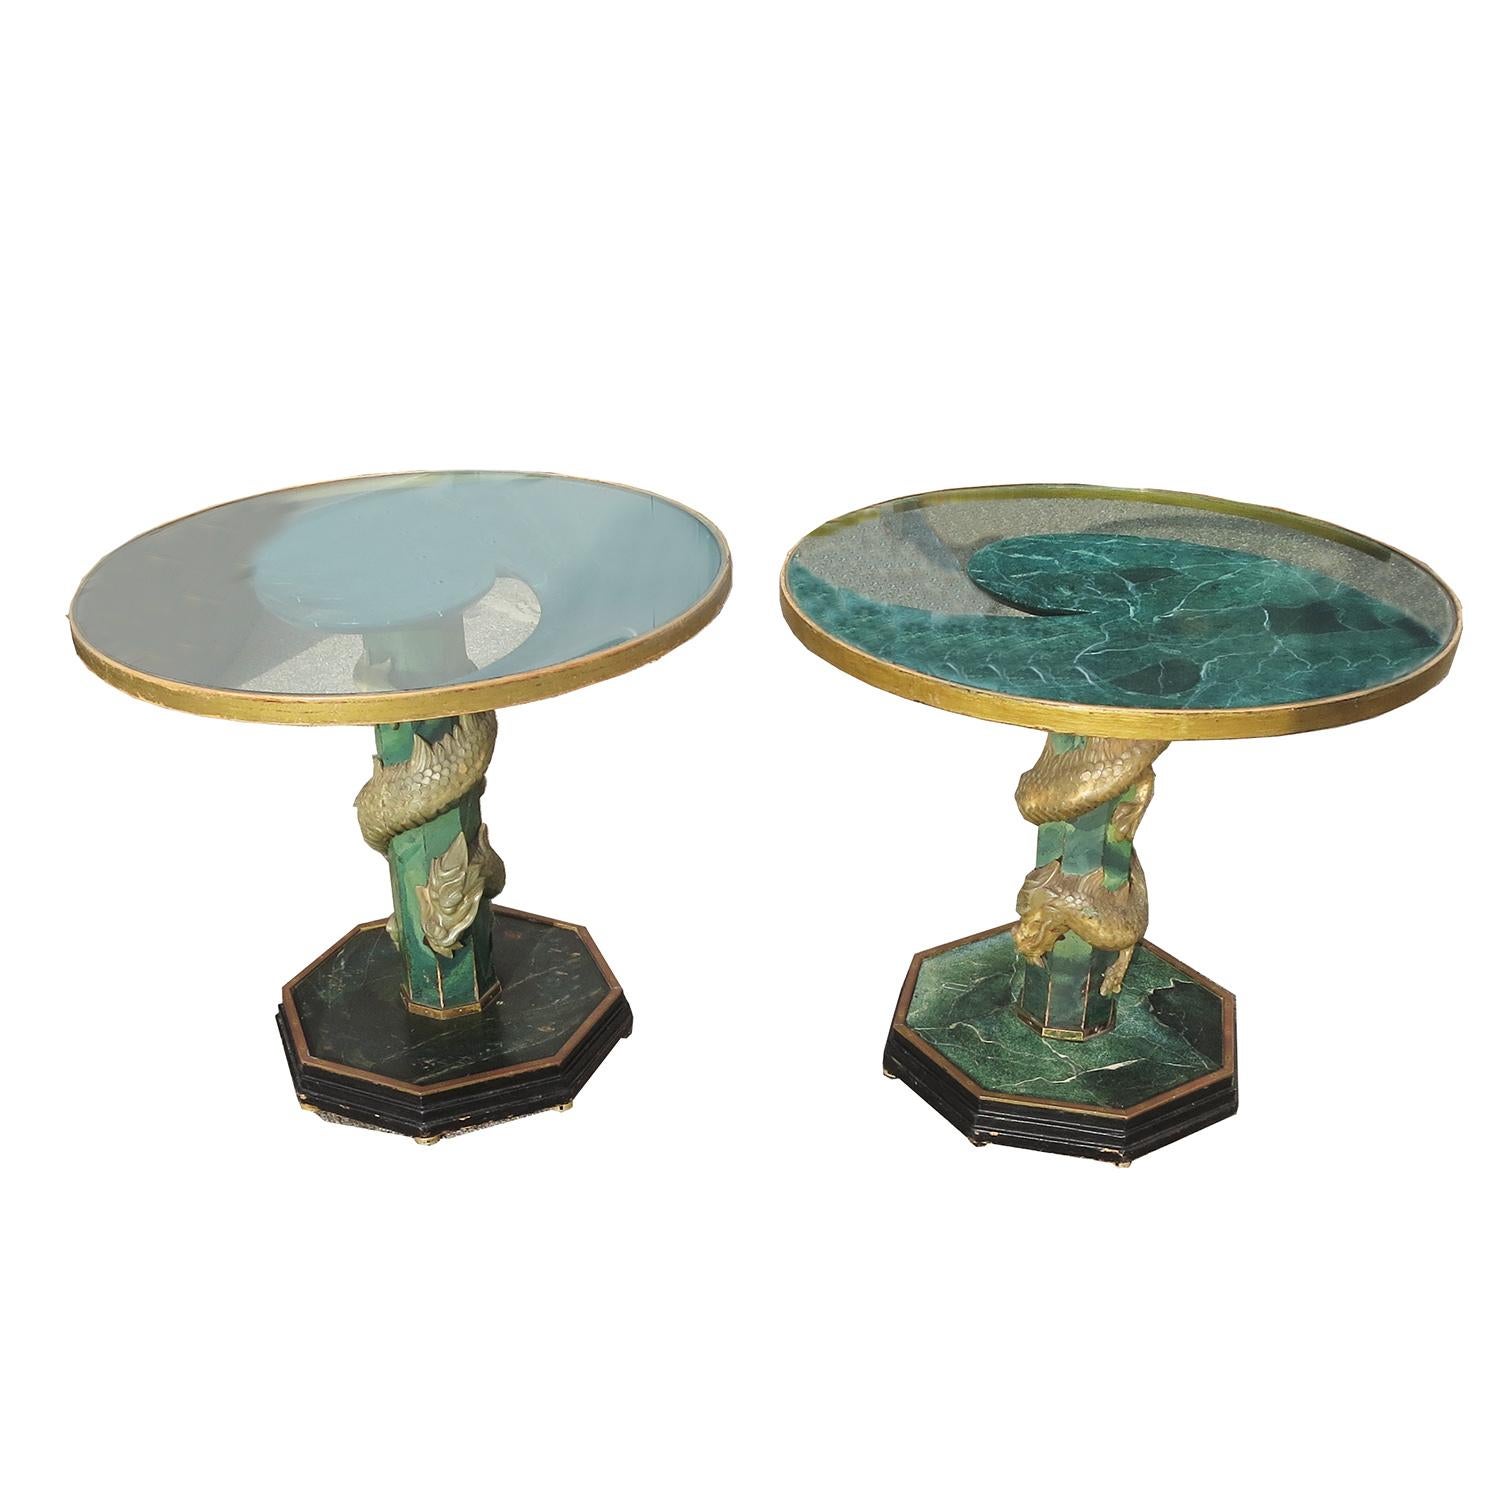 These tables are amazing! Each one has a base of painted wood that is surrounded by carved stone dragons. The tops are glass, with a decorative faux marble painted wood support. One is painted quite elaborately, while the other is a simpler design.